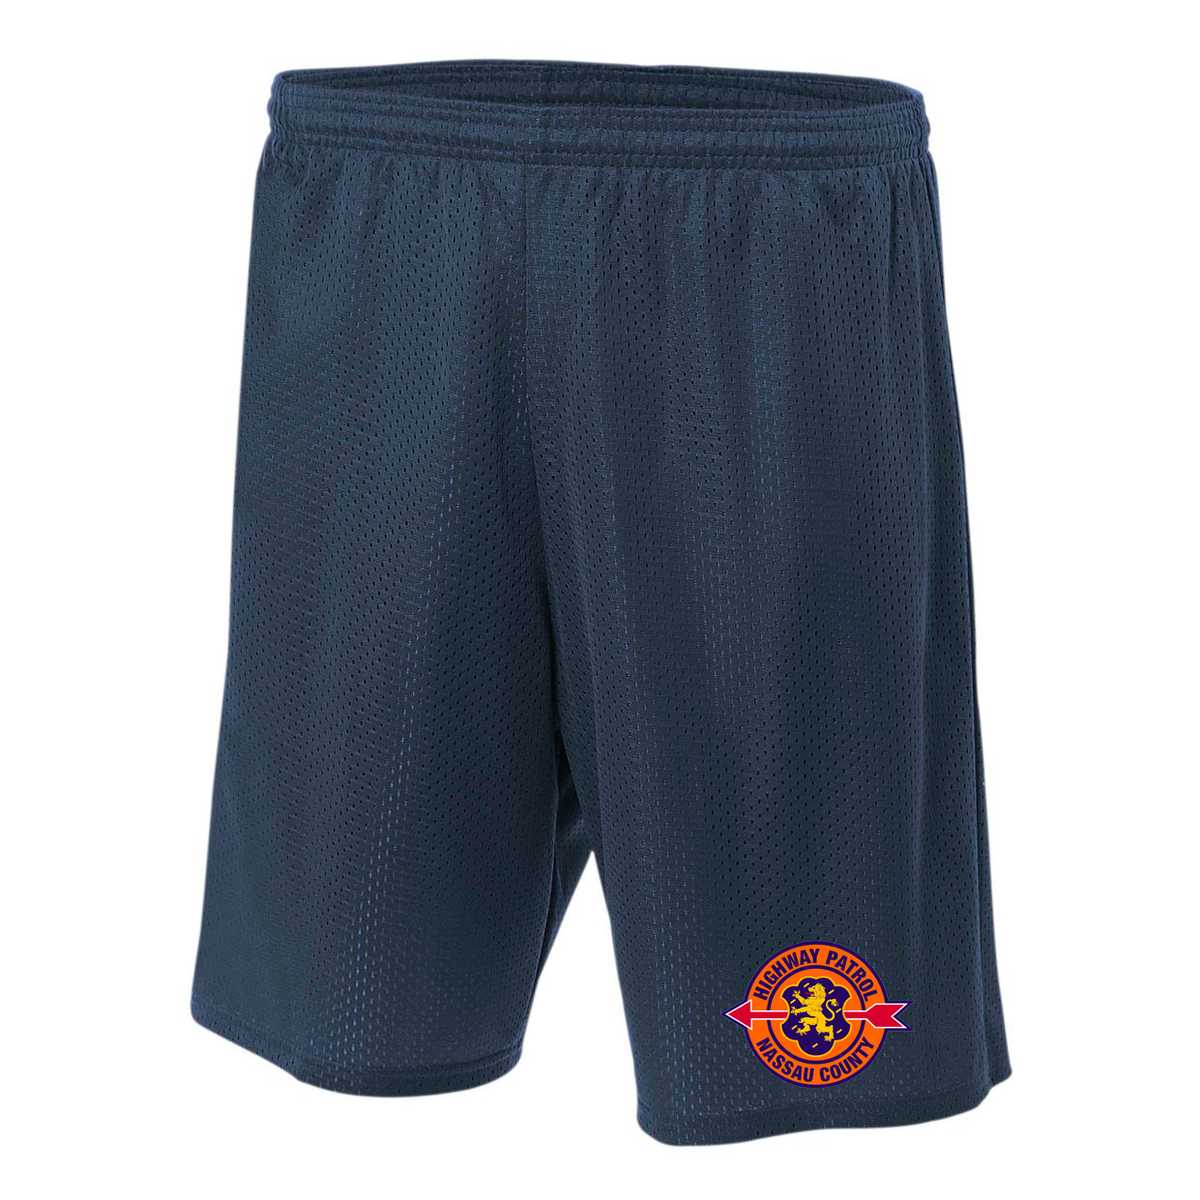 NCPD Highway Patrol 7" Lined Tricot Mesh Shorts